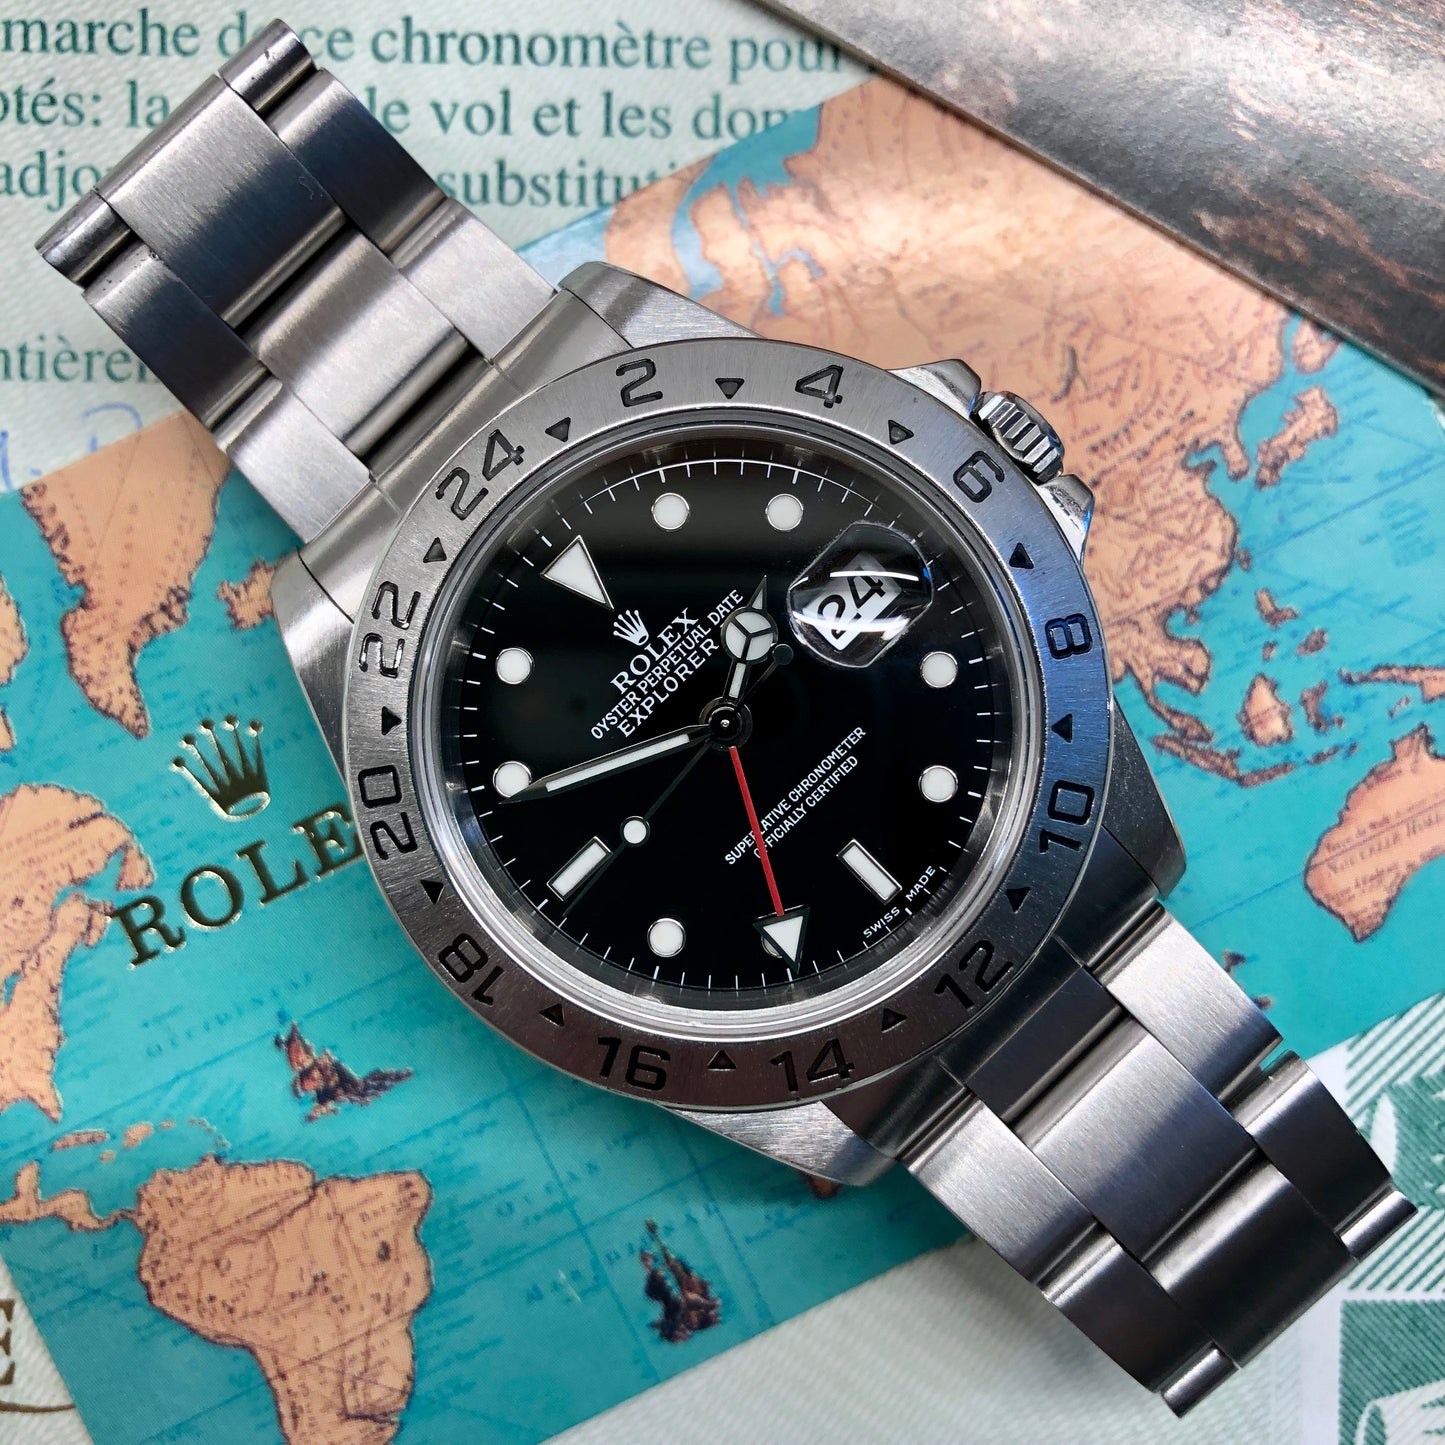 1999 Rolex Explorer II 16570 Black Dial Steel Oyster Wristwatch Box Papers - Hashtag Watch Co.